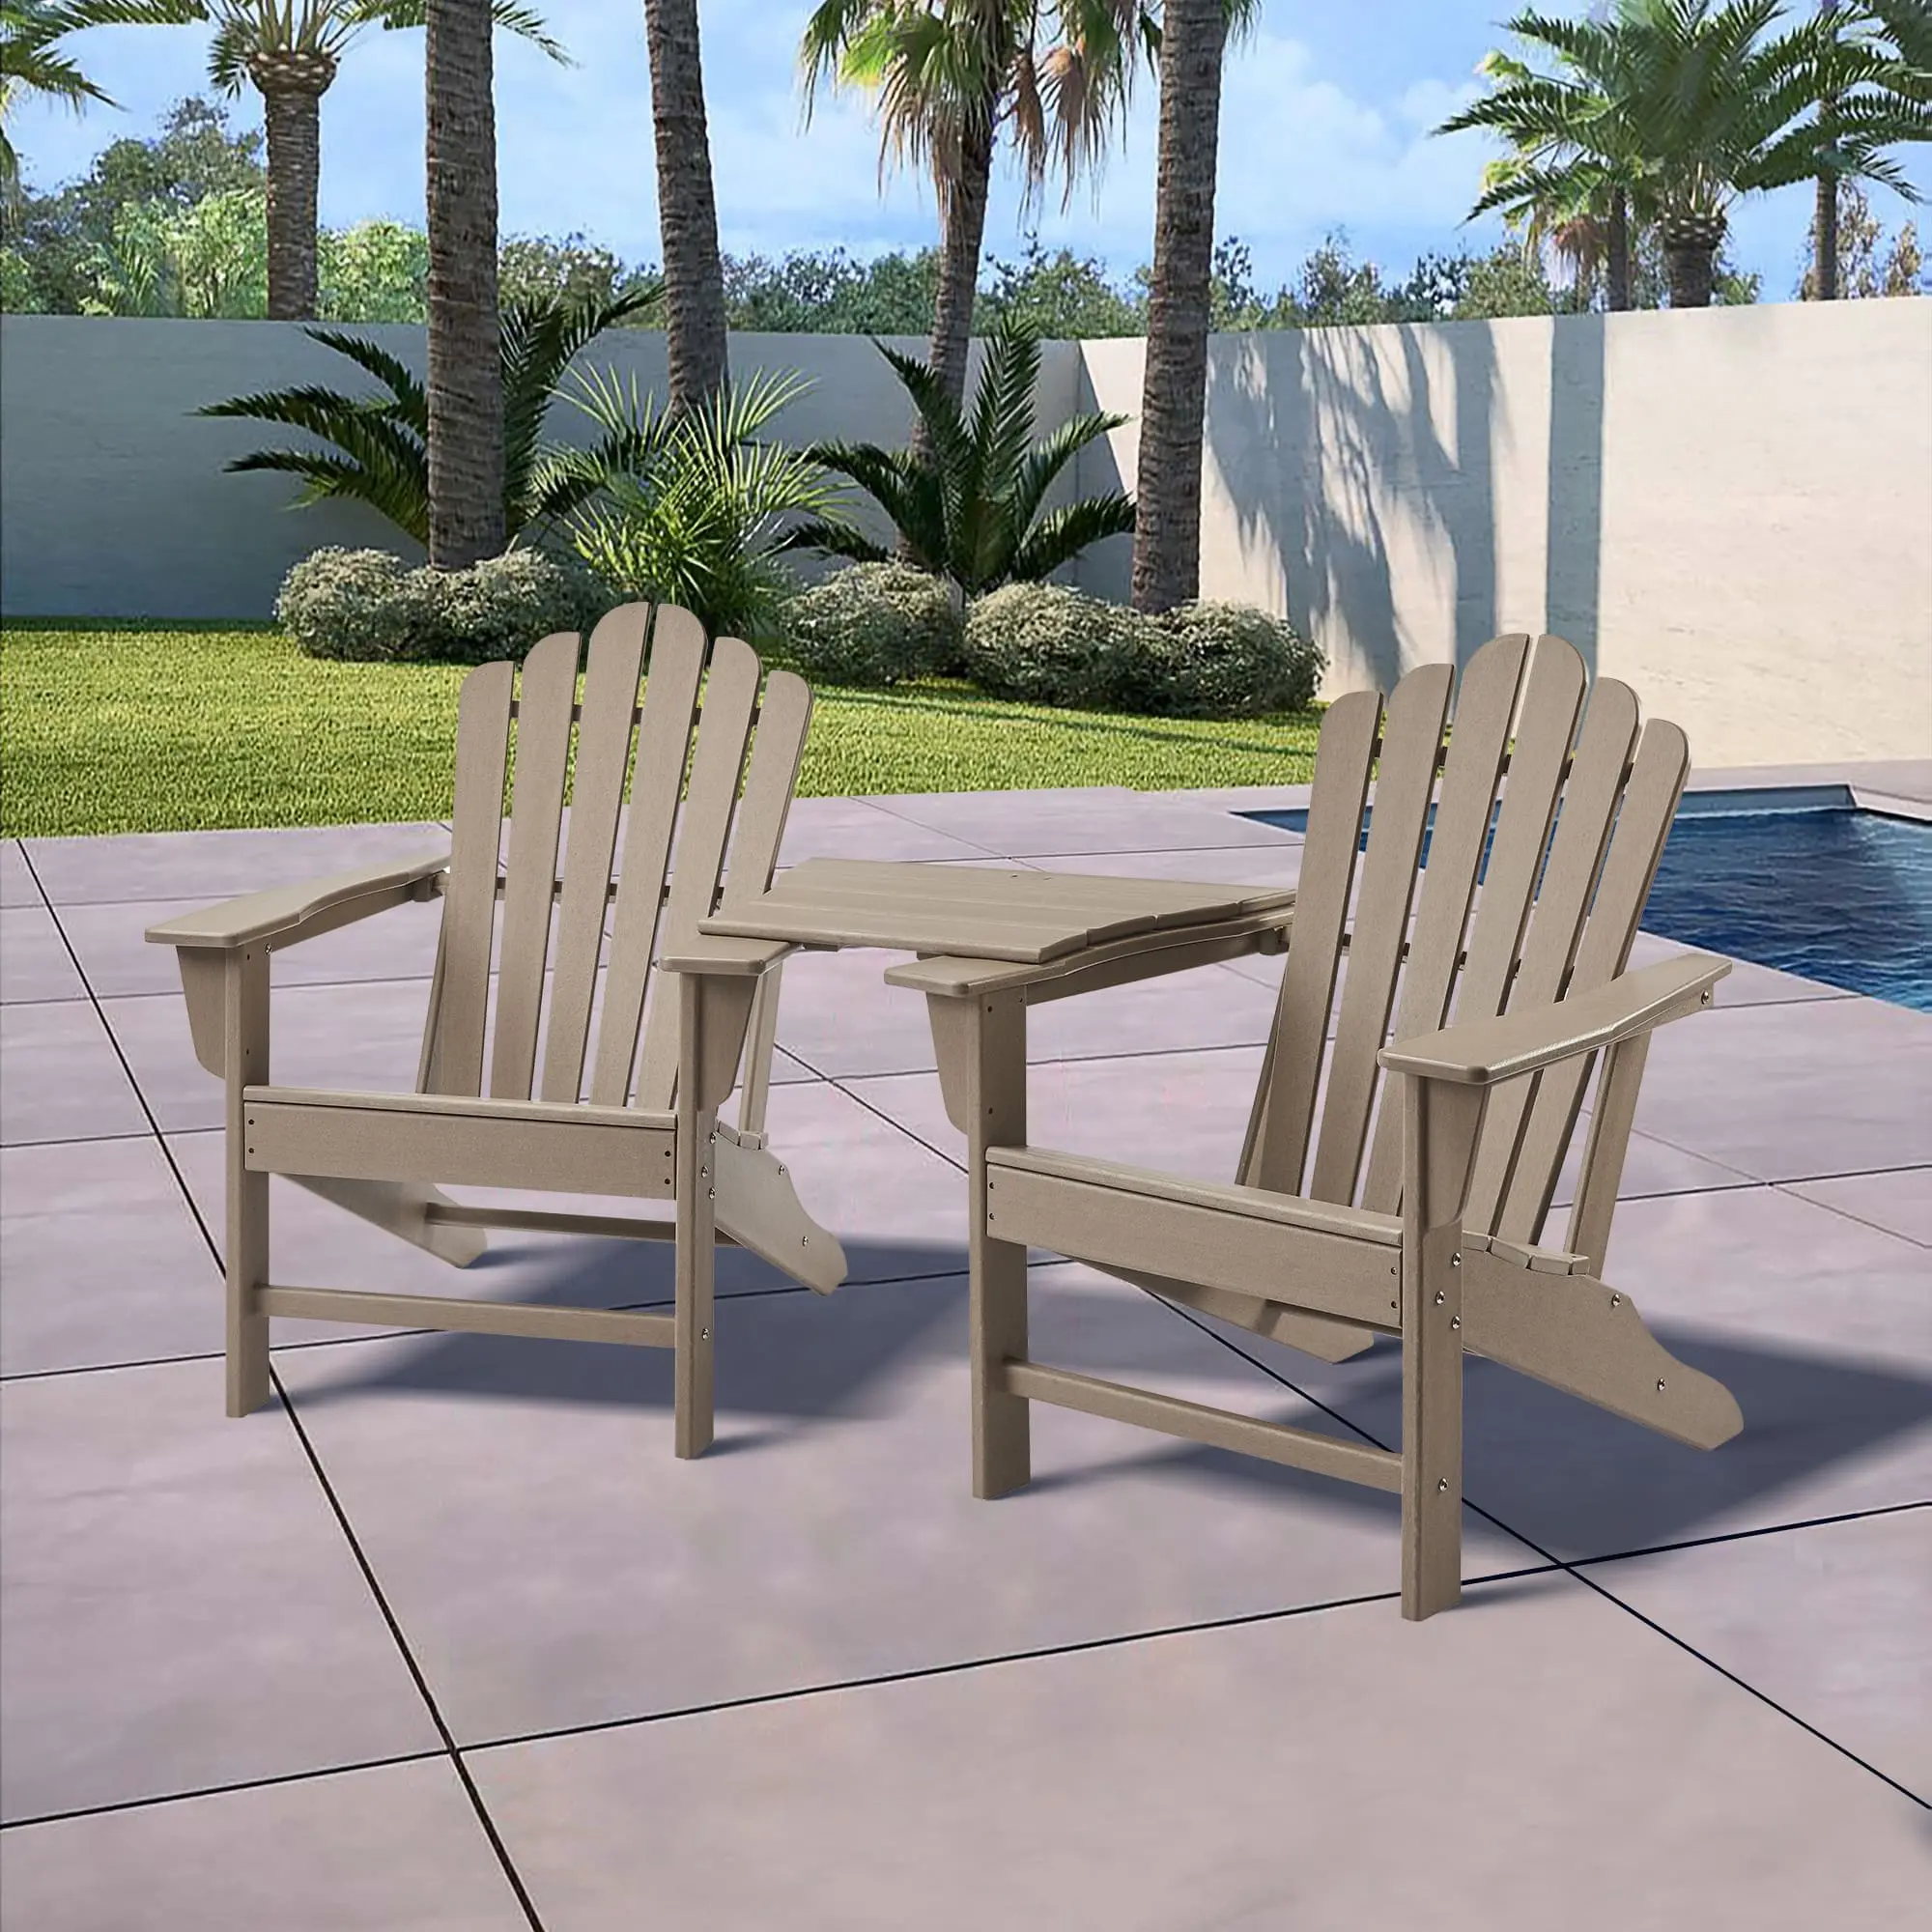 Set of 2 Classic Outdoor HDPE Adirondack Chairs for Garden 